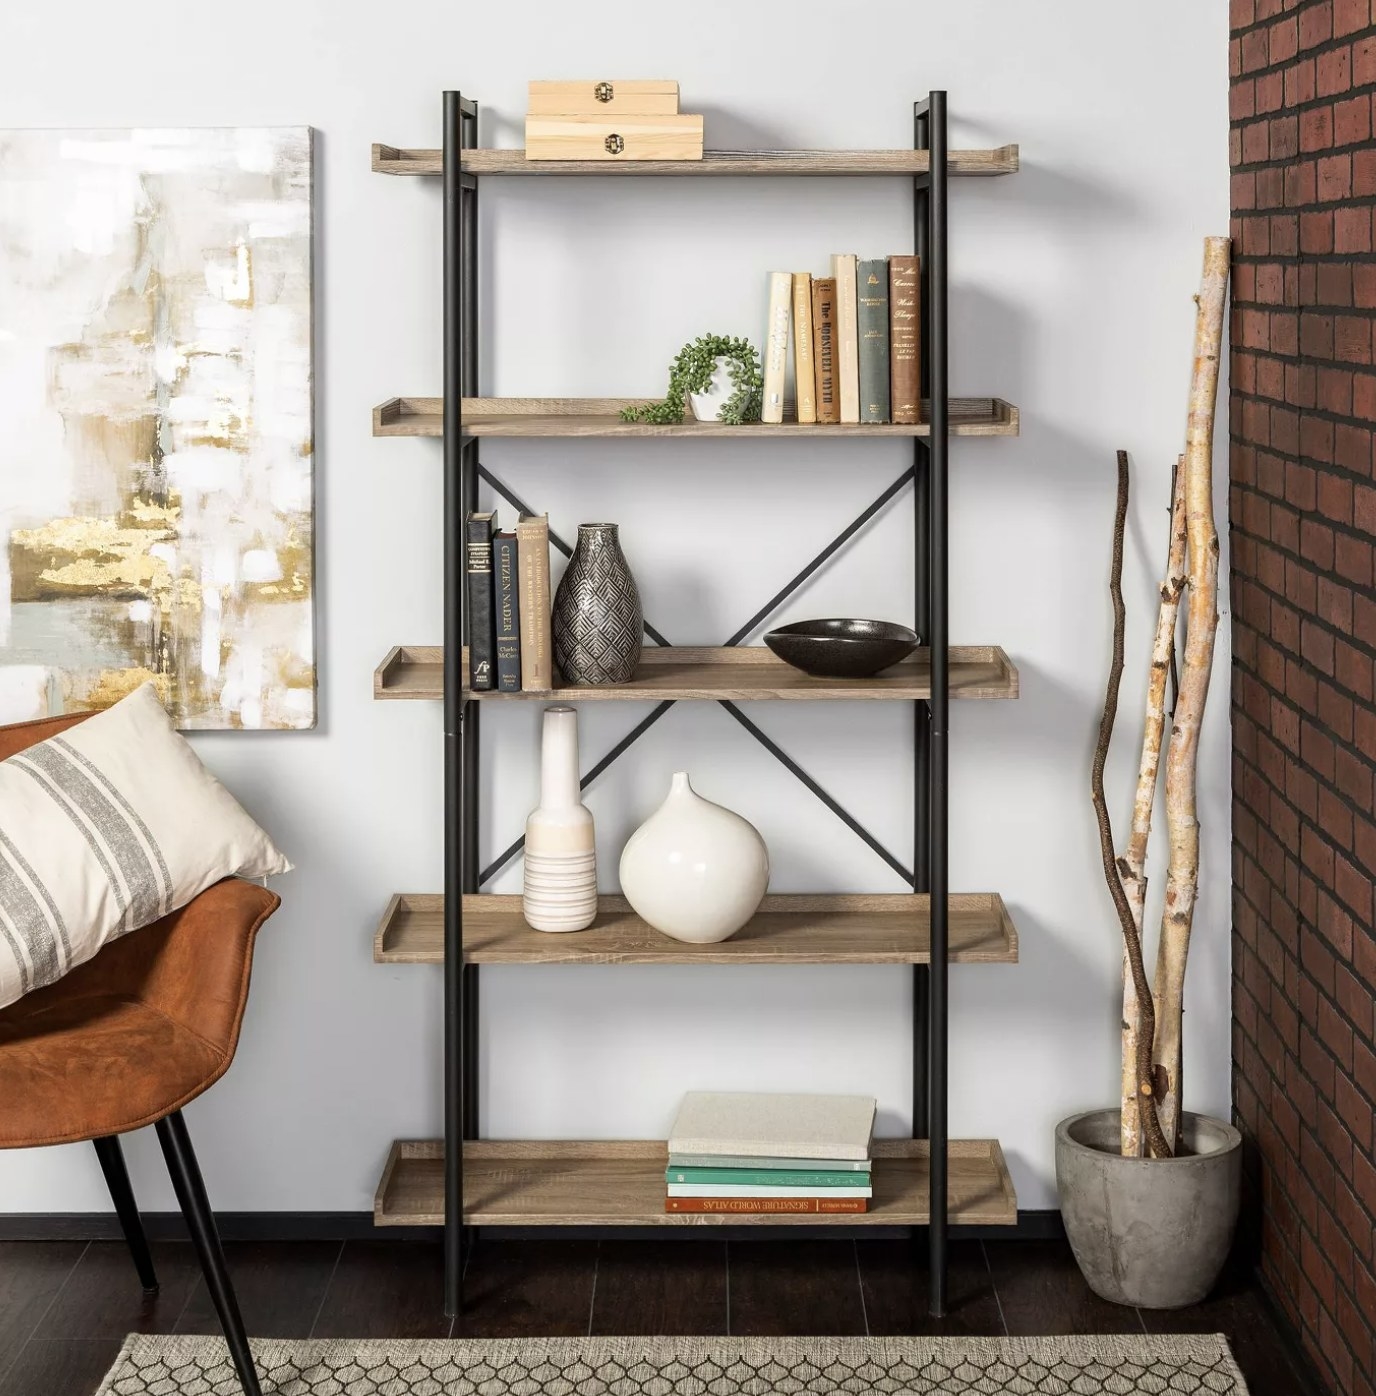 31 Home Products From Target That Are Equal Parts Gorgeous And Useful